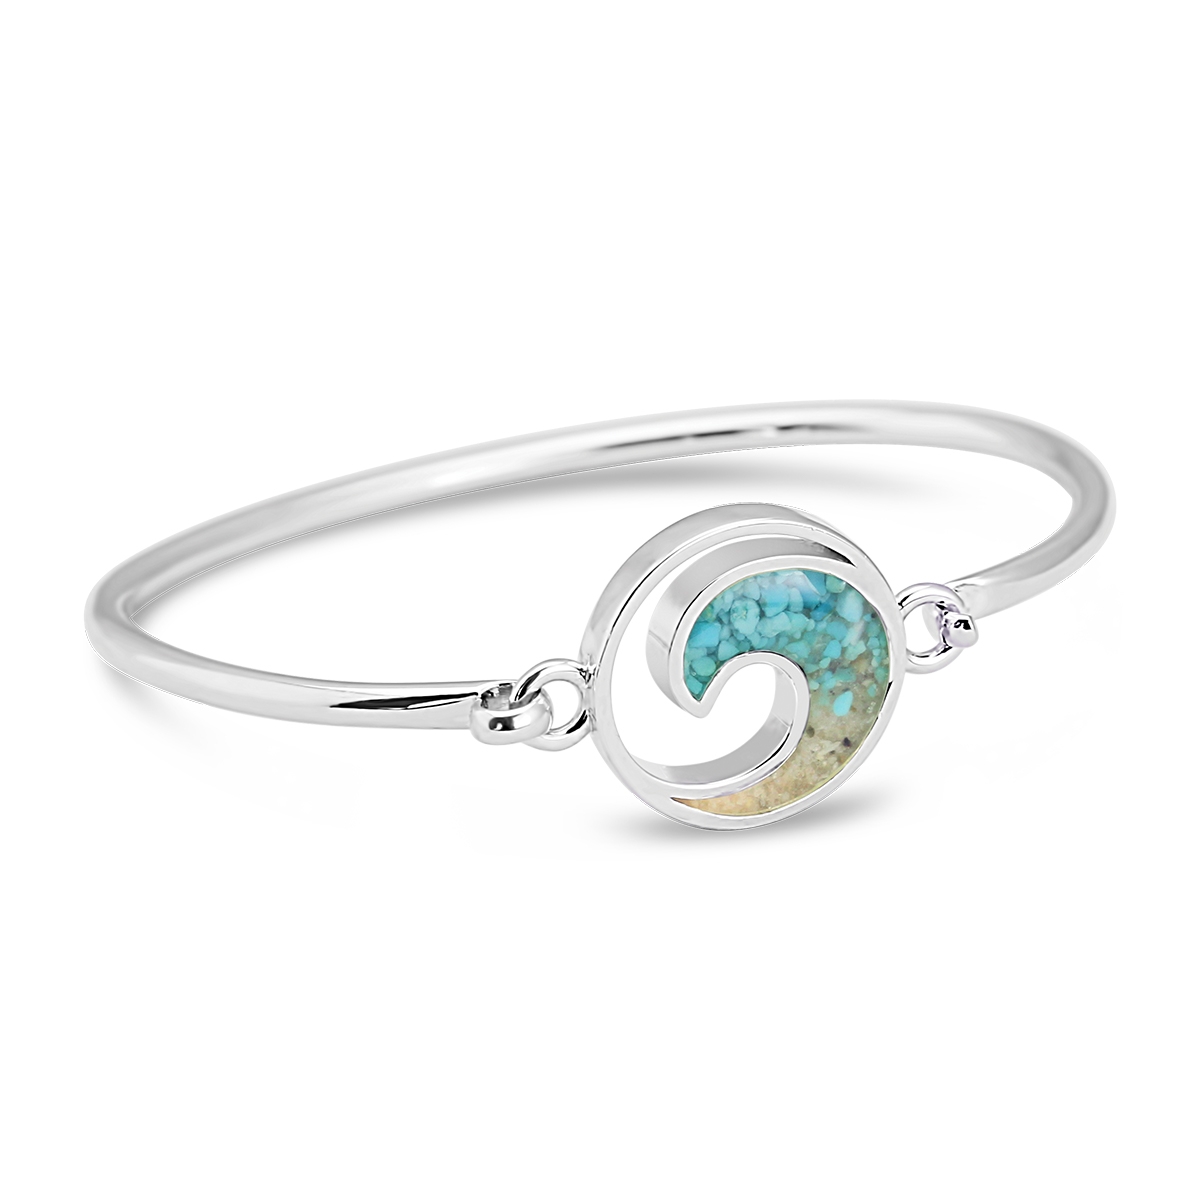 Sterling silver bangle bracelet with wave shaped setting featuring a sand or earth element and turquoise gradient. The perfect Valentine's gift.